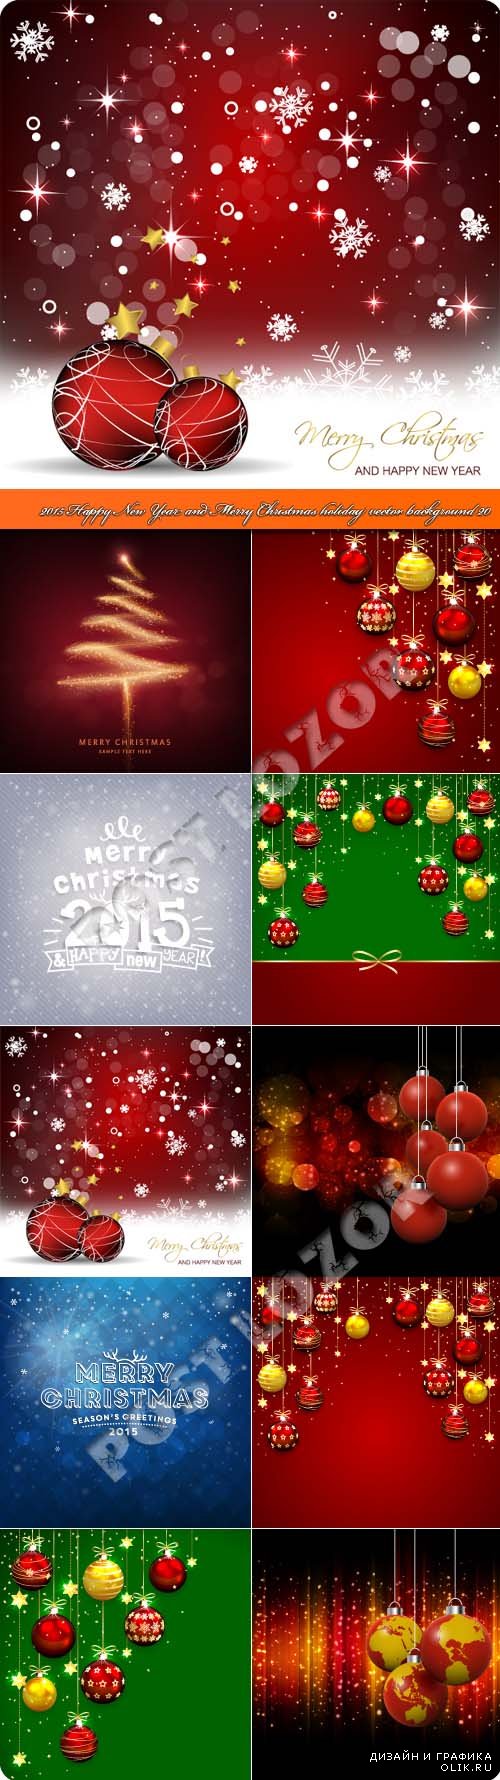 2015 Happy New Year and Merry Christmas holiday vector background 20